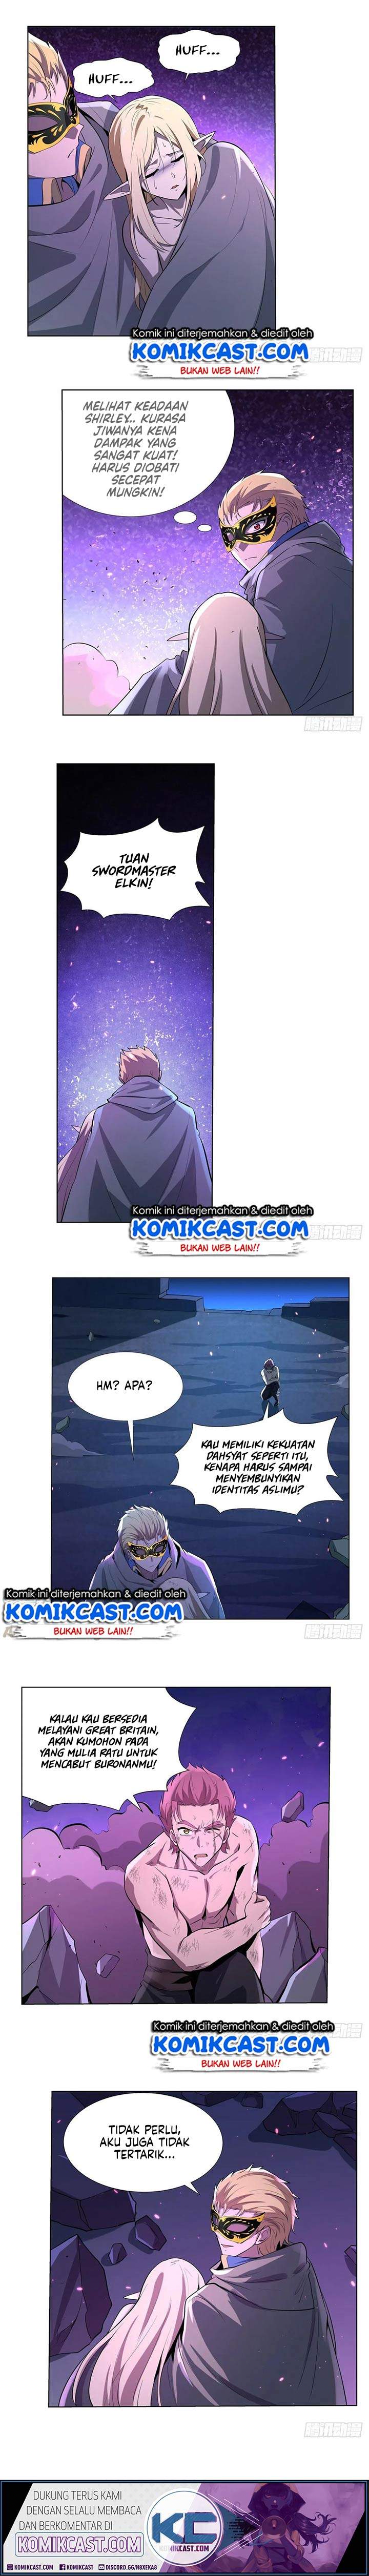 The Demon King Who Lost His Job Chapter 103 Bahasa Indonesia